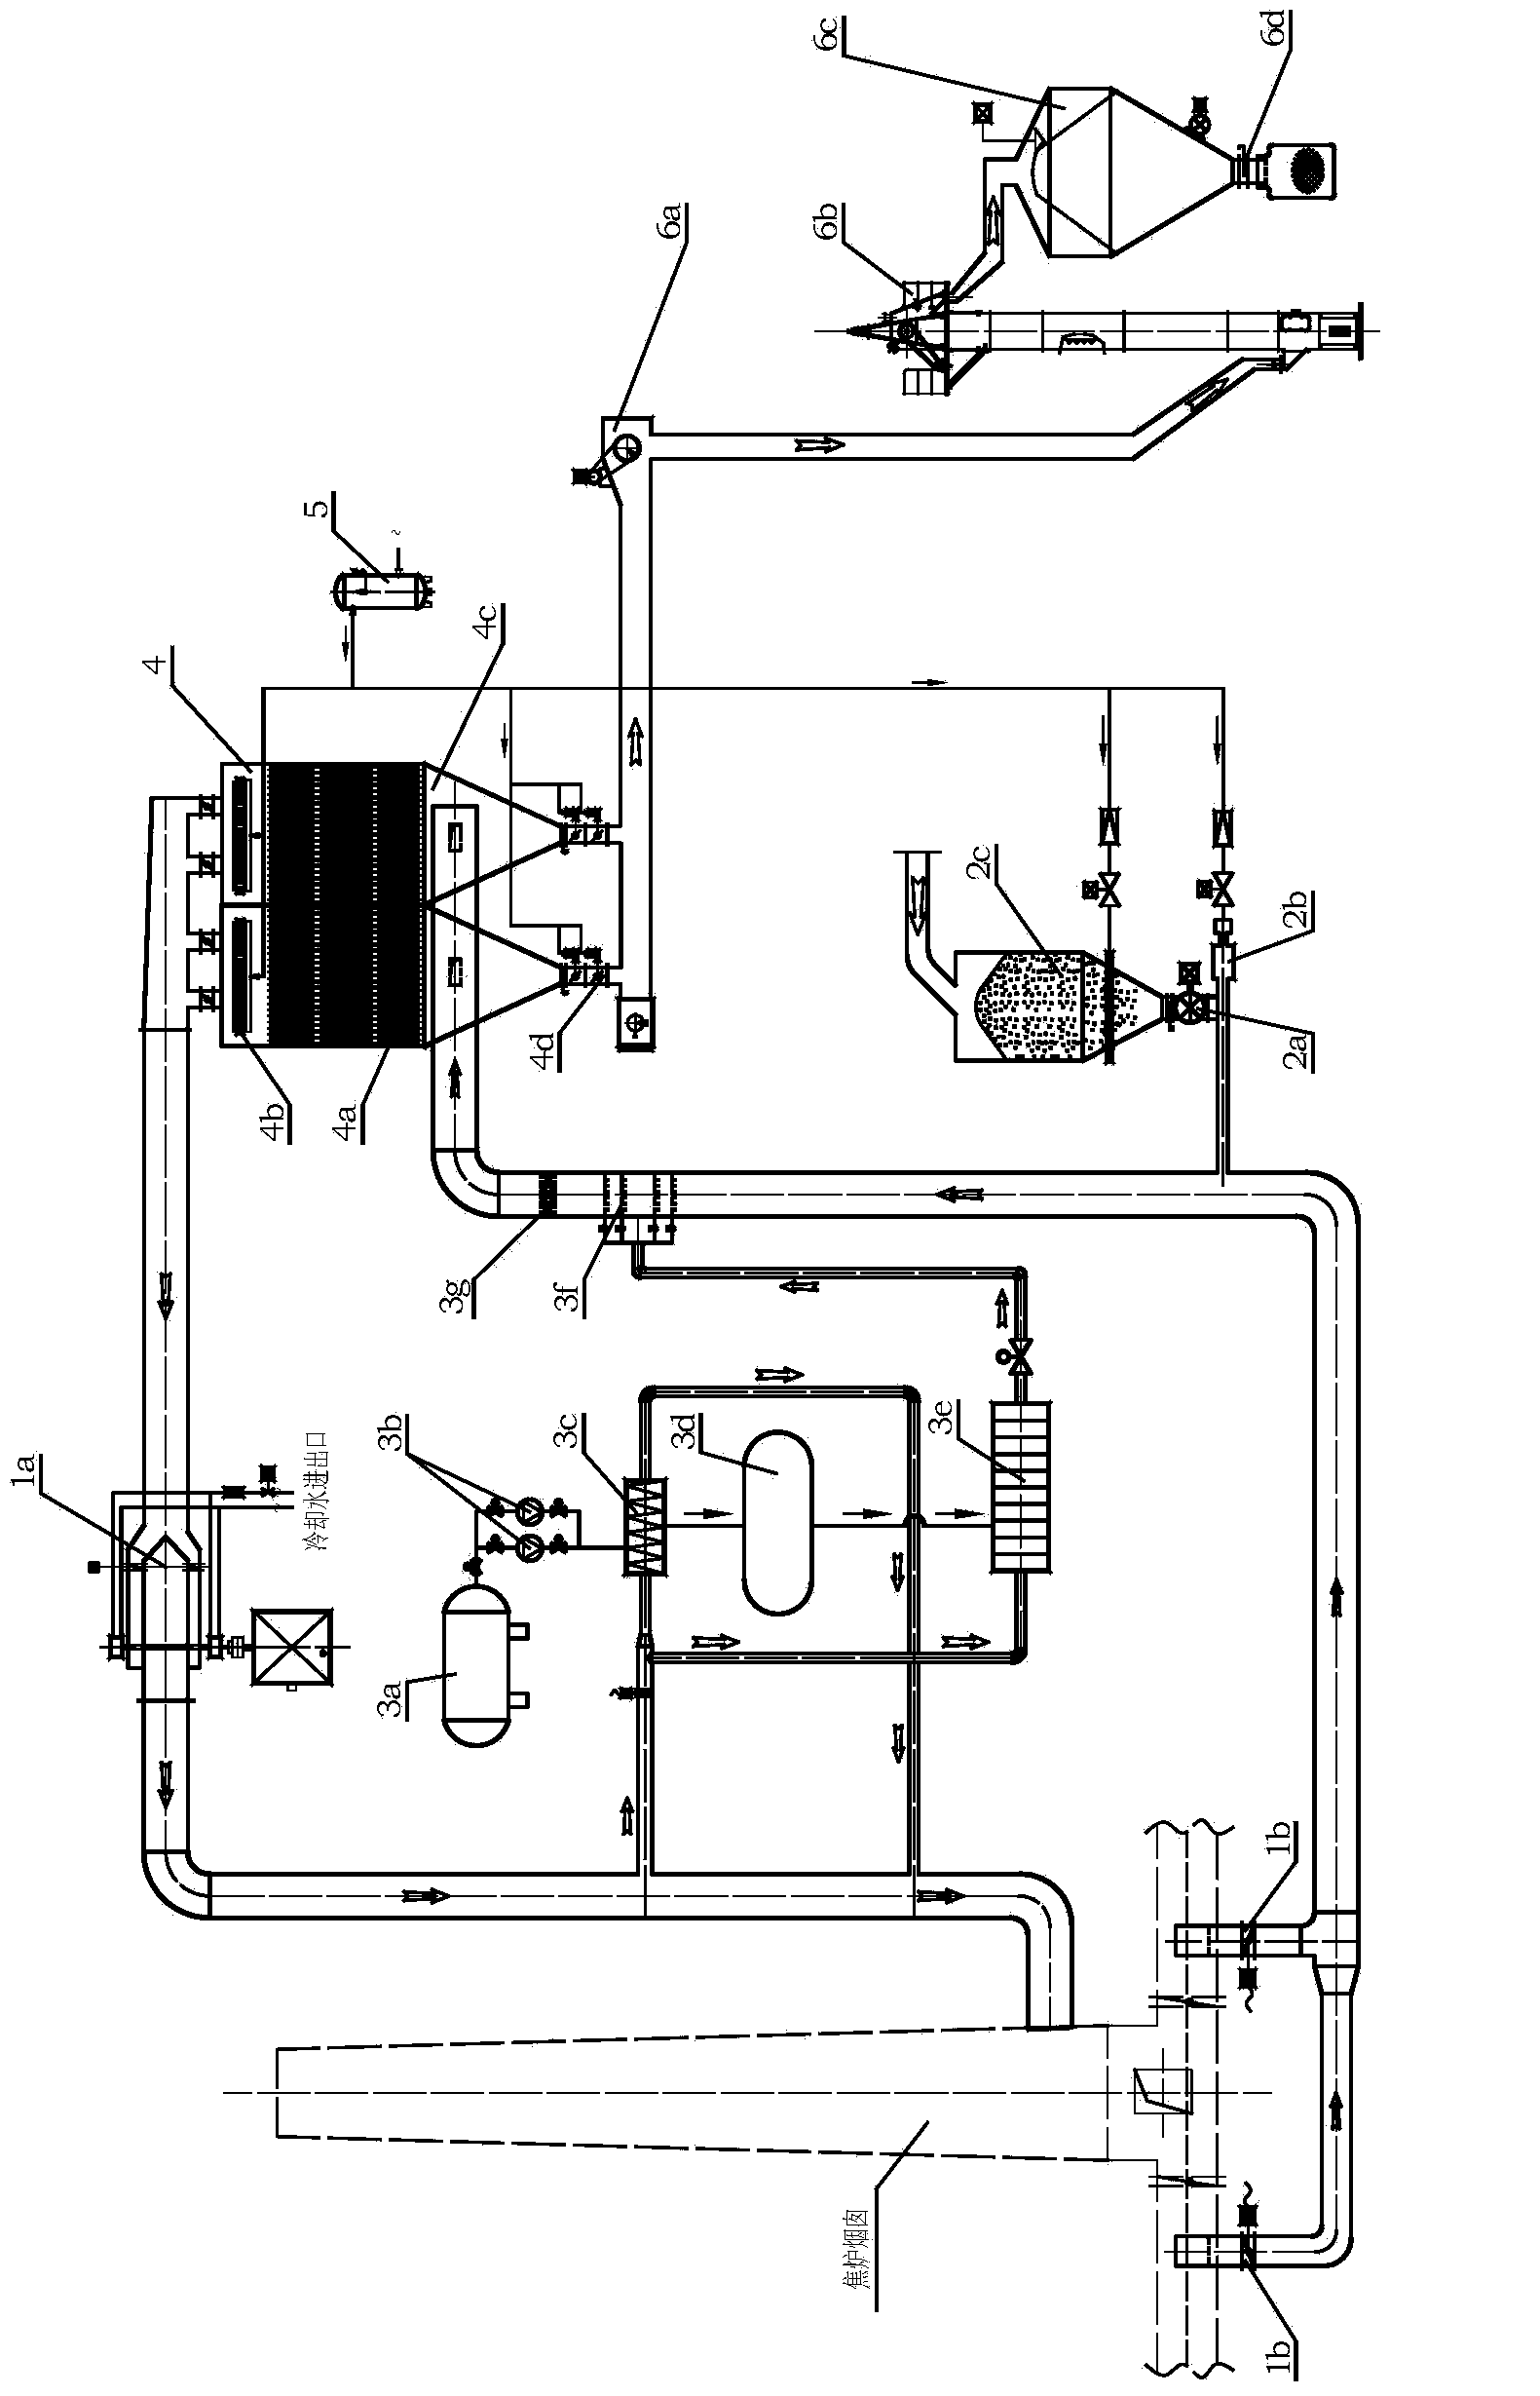 Integrated low-temperature flue gas desulfurization, denitration and ammonia removal process